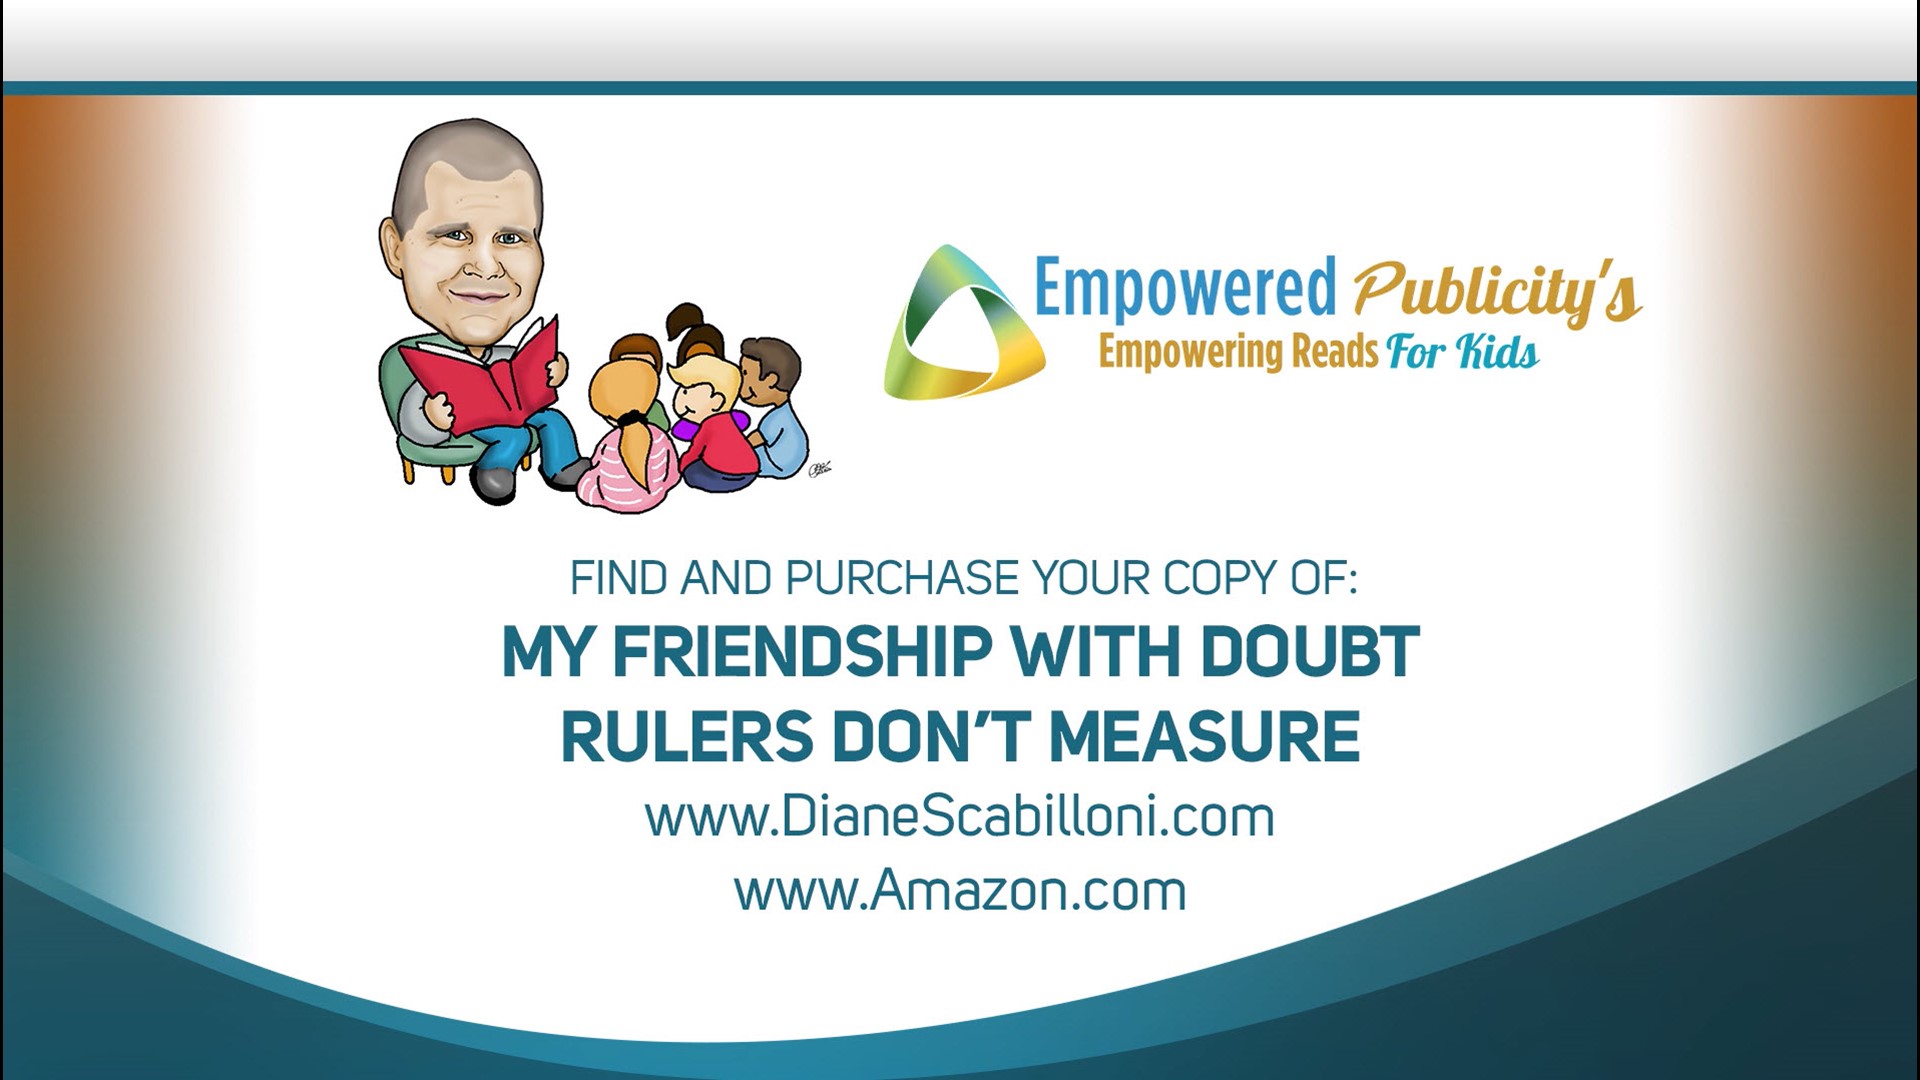 Books like these, ones with redeeming messages, are great reads and valuable resources for parents and educators. Sponsored by:  Empowered Publicity